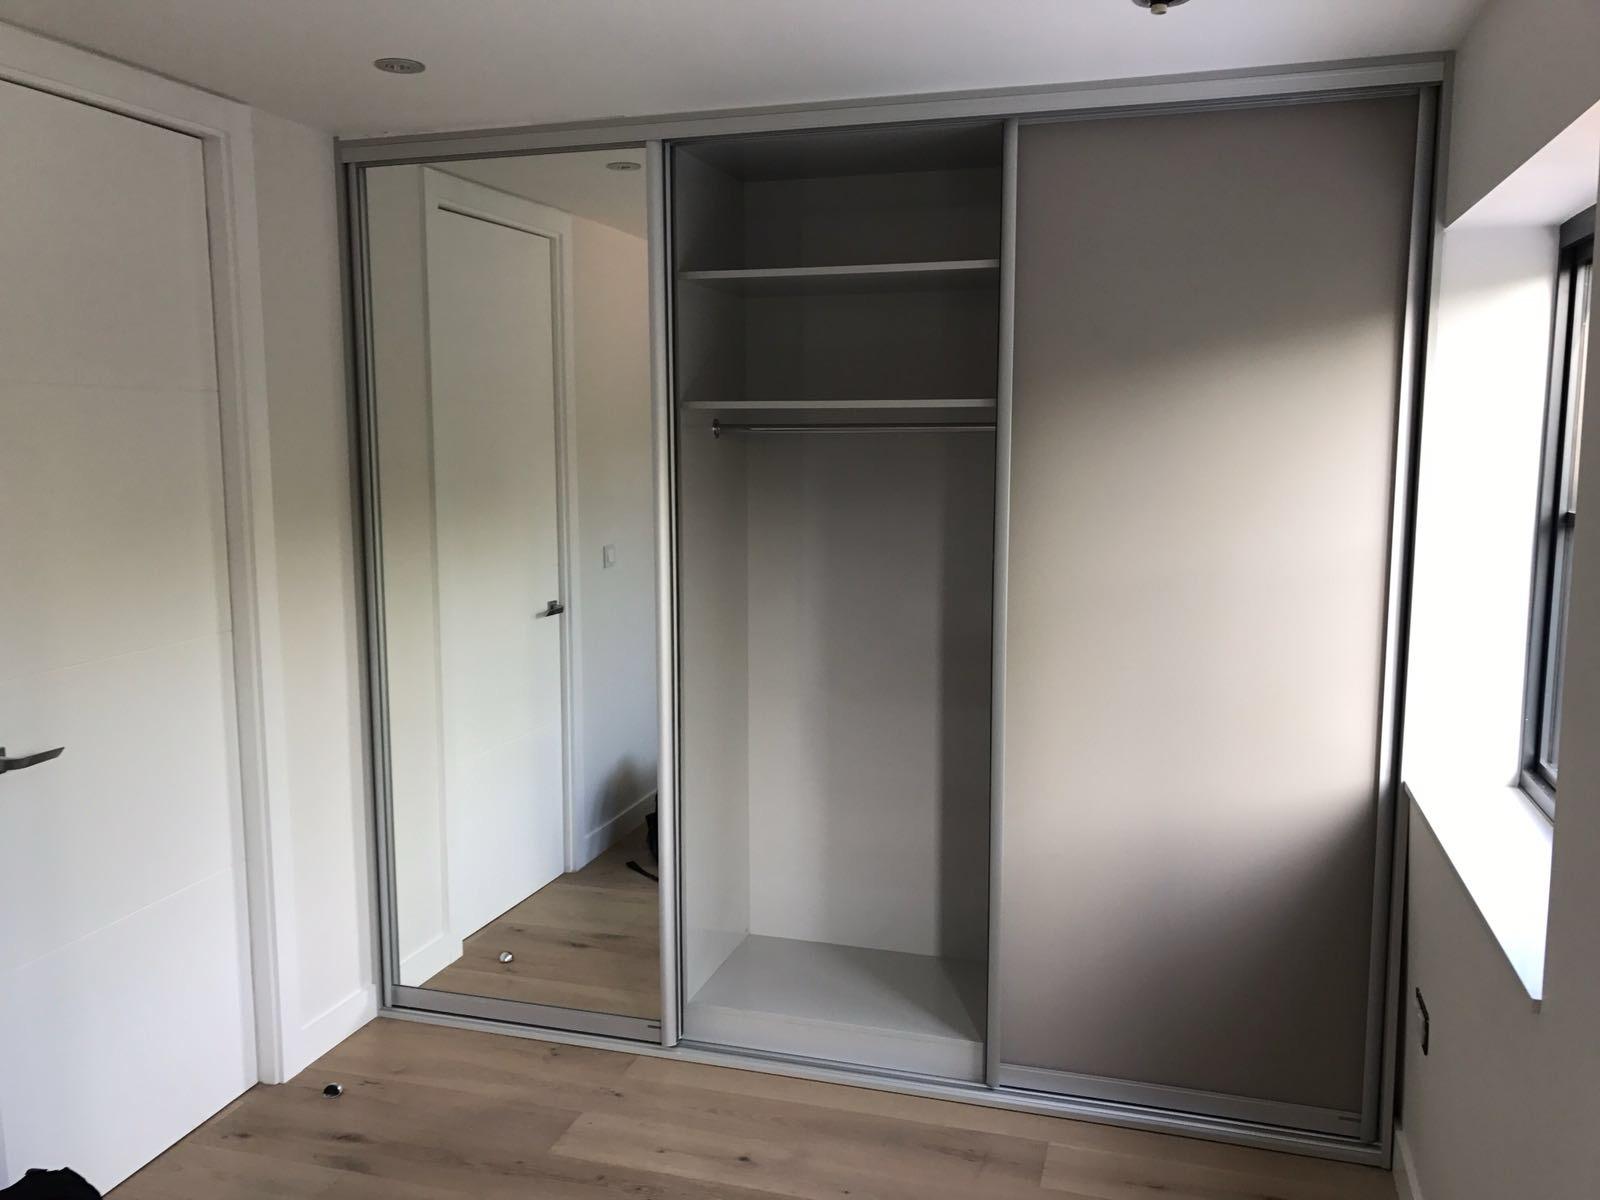 A modern, empty fitted wardrobe with mirrored sliding doors, featuring several shelves and a hanging rod, in a room with hardwood floors and natural light.